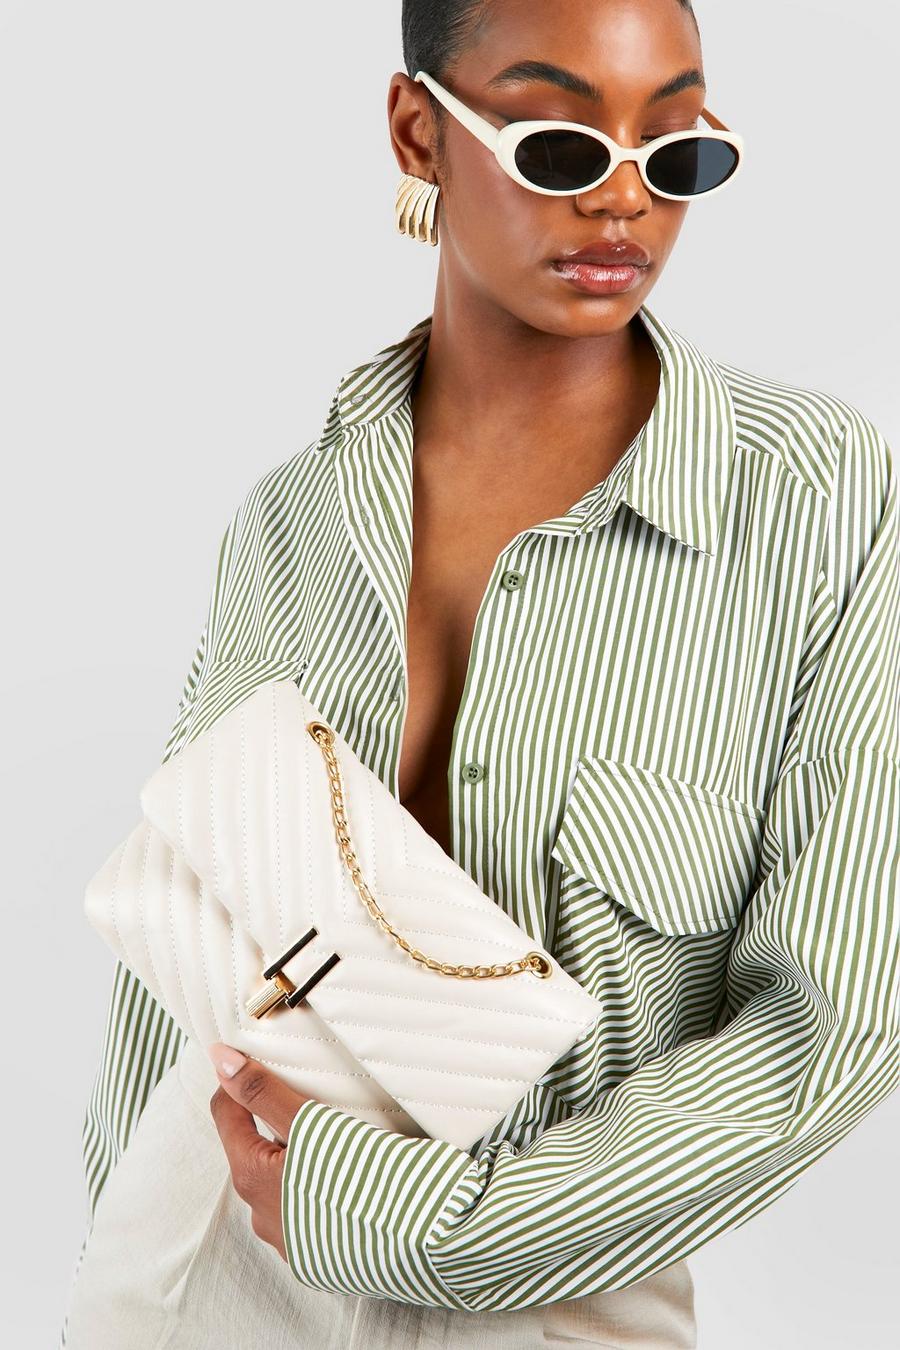 Cream Quilted Cross Body Bag image number 1